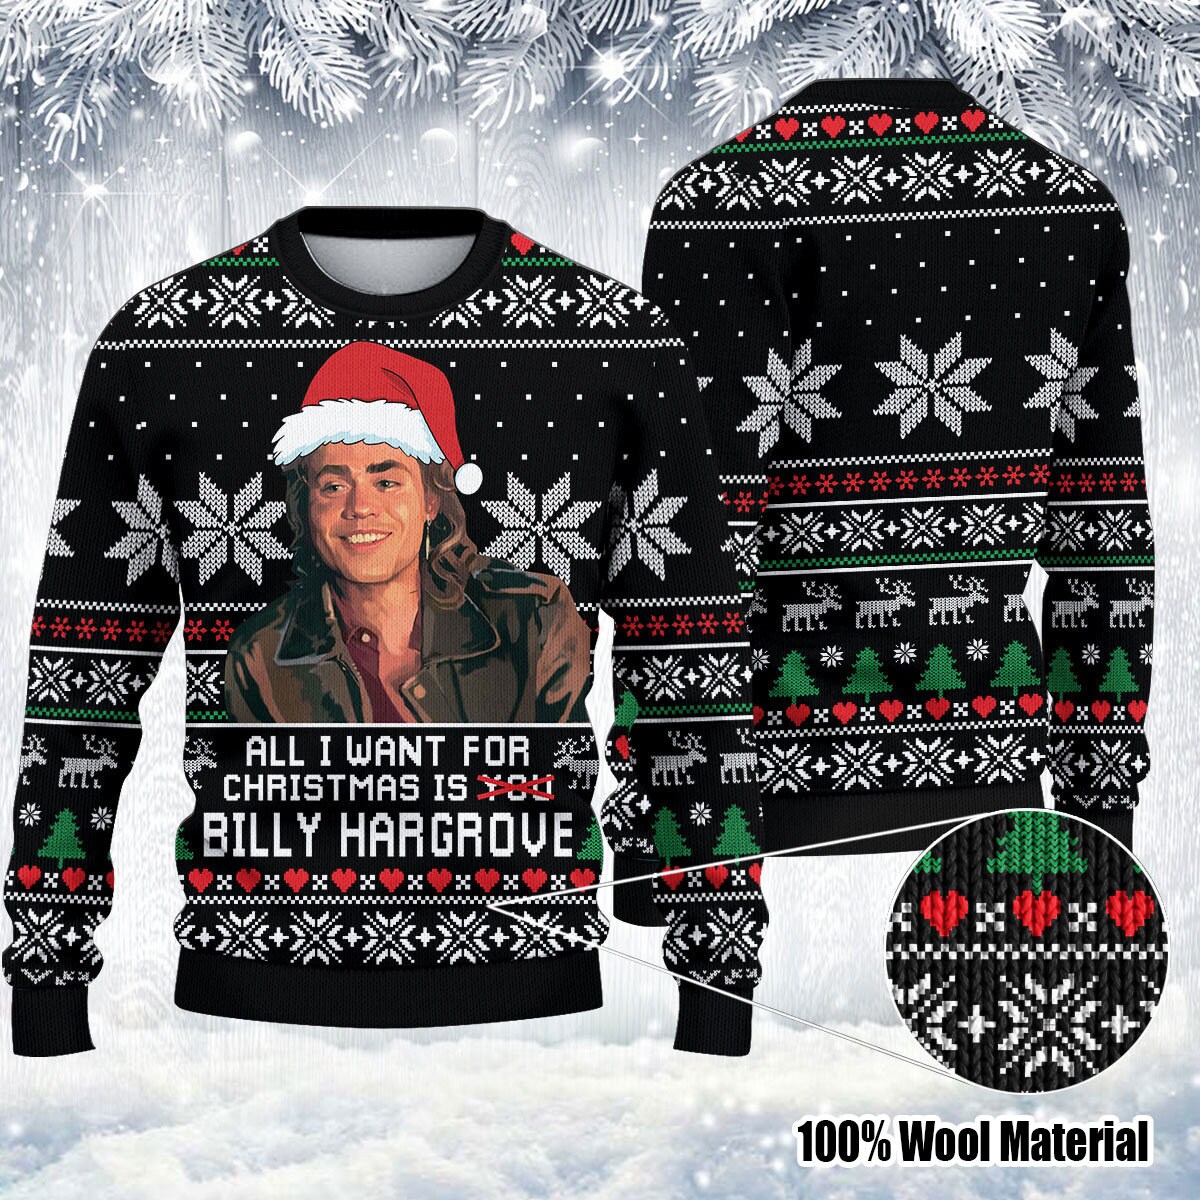 All I Want Is Billy Hargrove Ugly Billy Hargrove Billy Hargrove Christmas Happy Xmas Wool Knitted Sweater